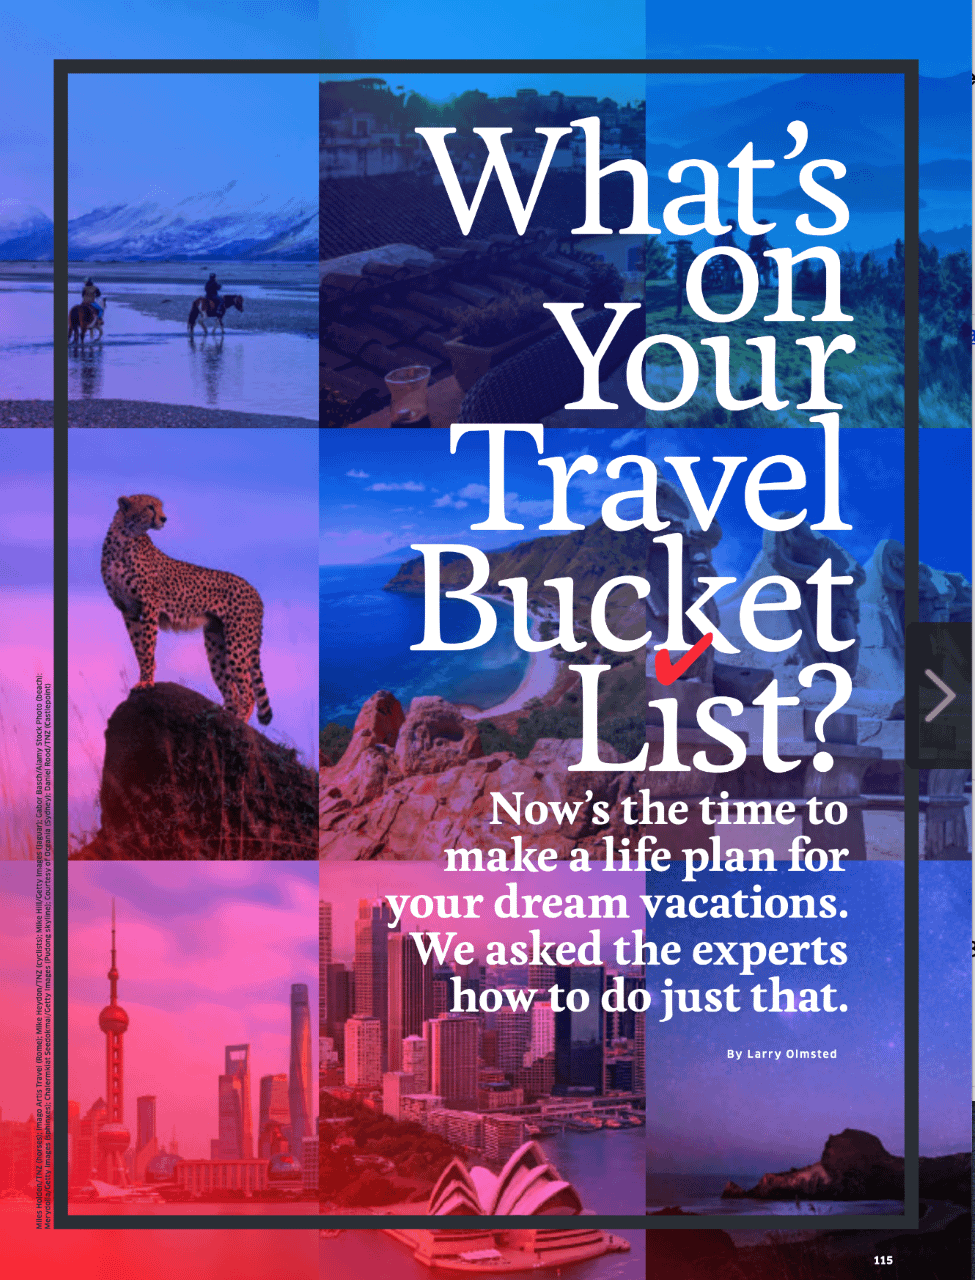 United Airlines Hemispheres Magazine- What’s on your travel bucket list?